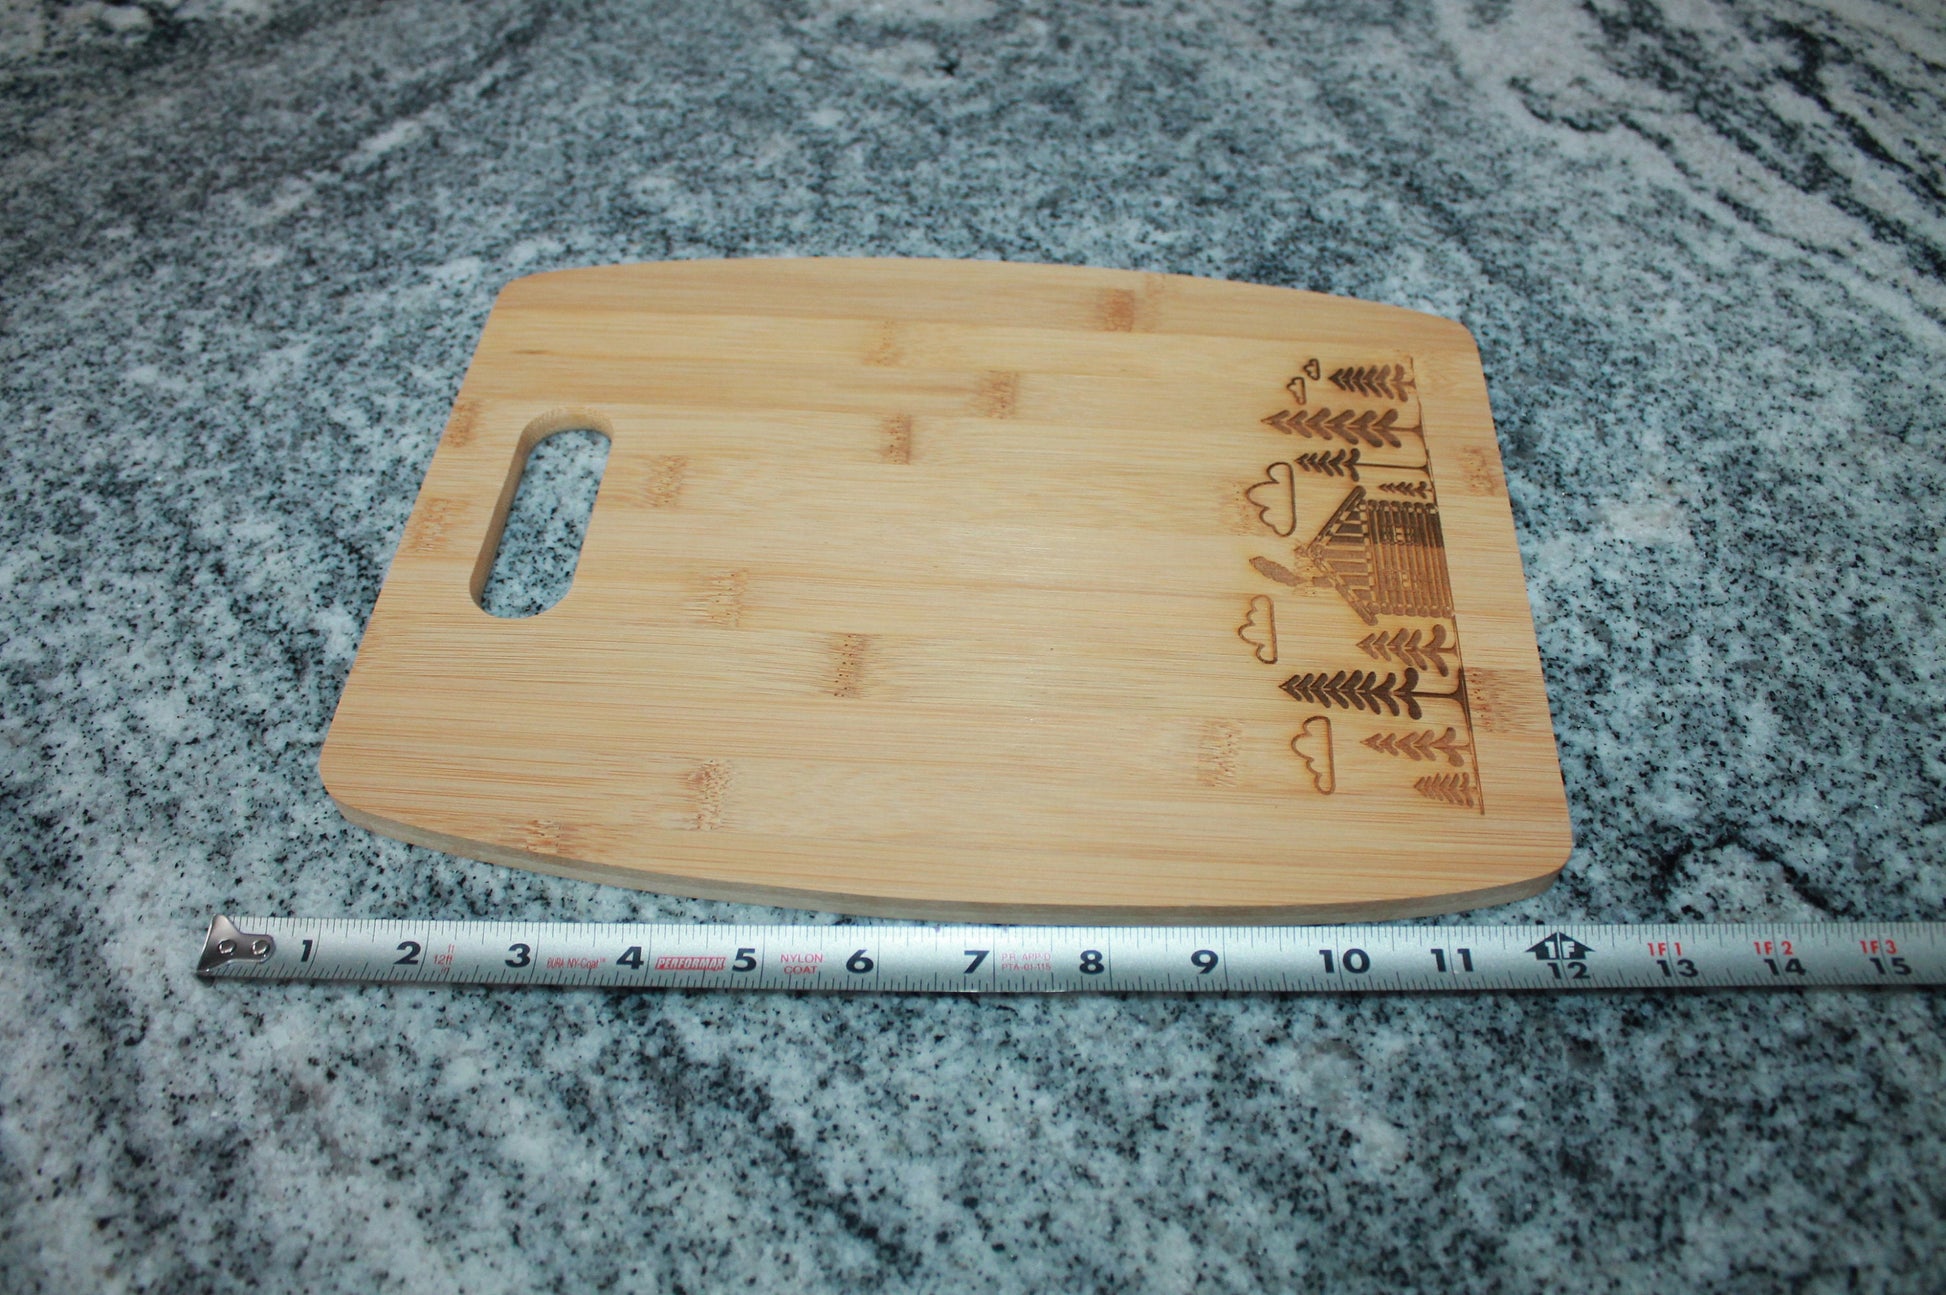 Wooden Engraved Cutting Board Cabin Get Away Woods Cute Homey Trees Camping Vacation Weekend Gift Hostess Hardwood Laser Culinary Cooking